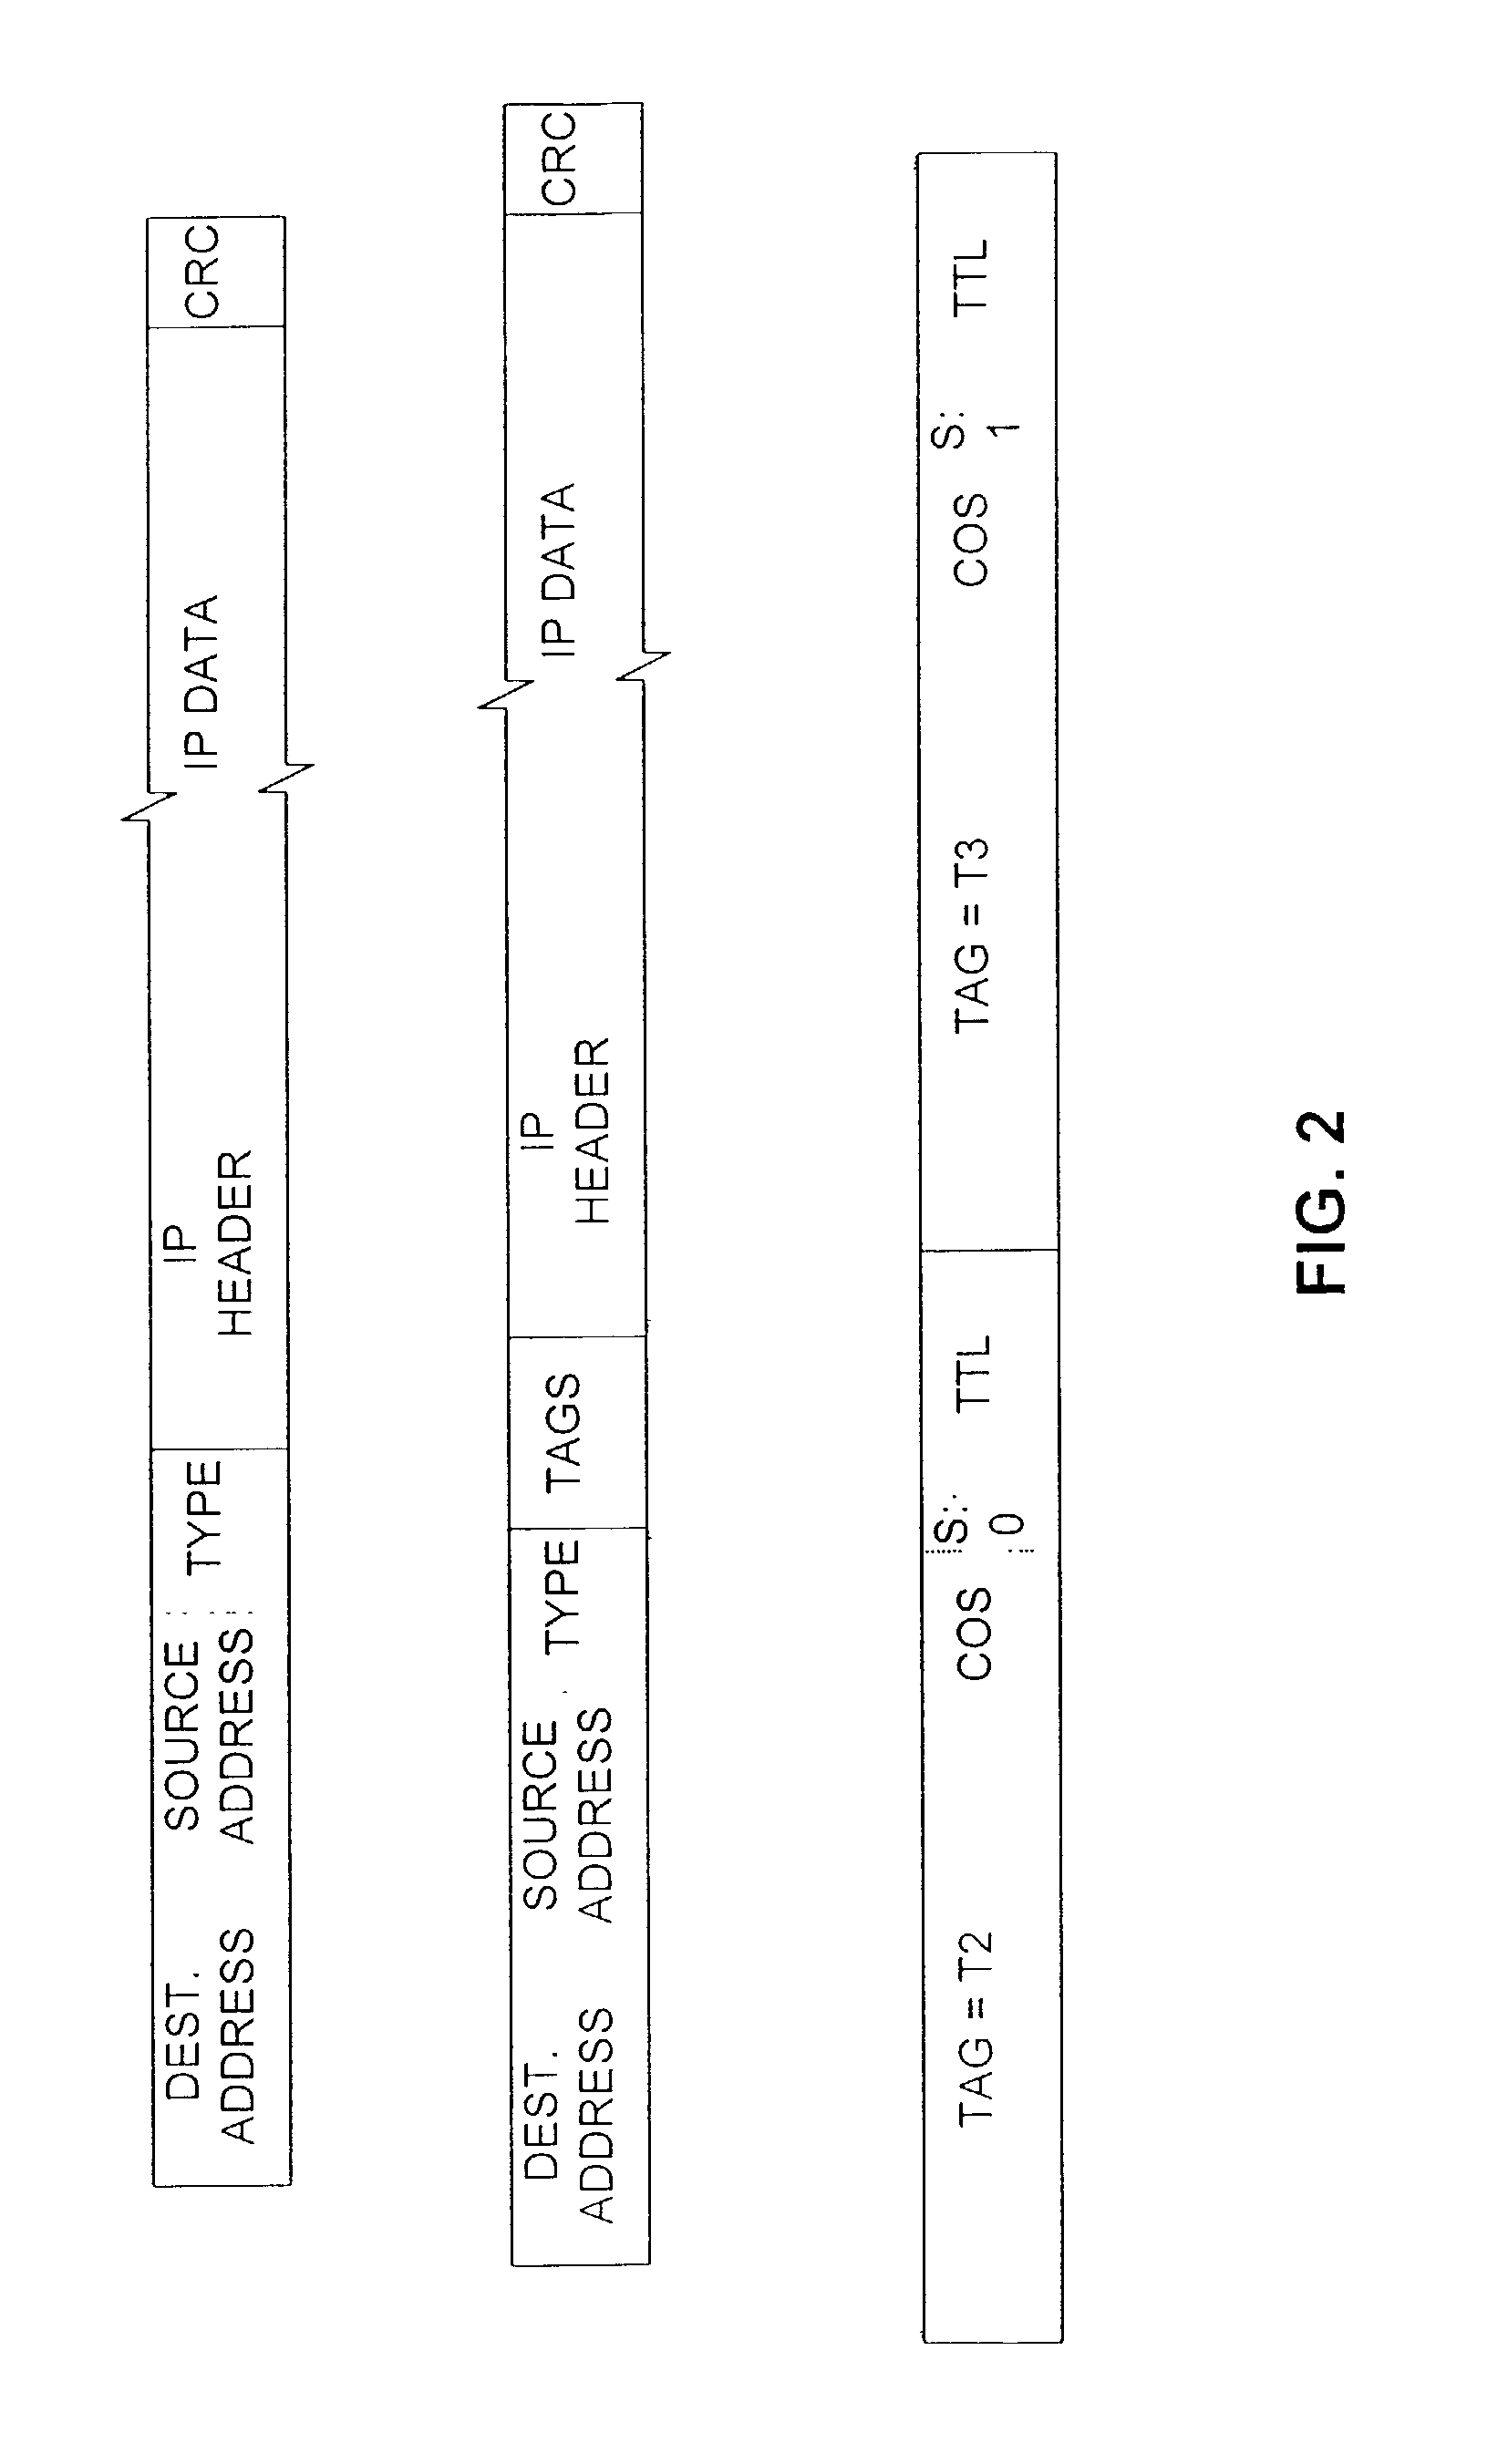 Router for virtual private network employing tag switching